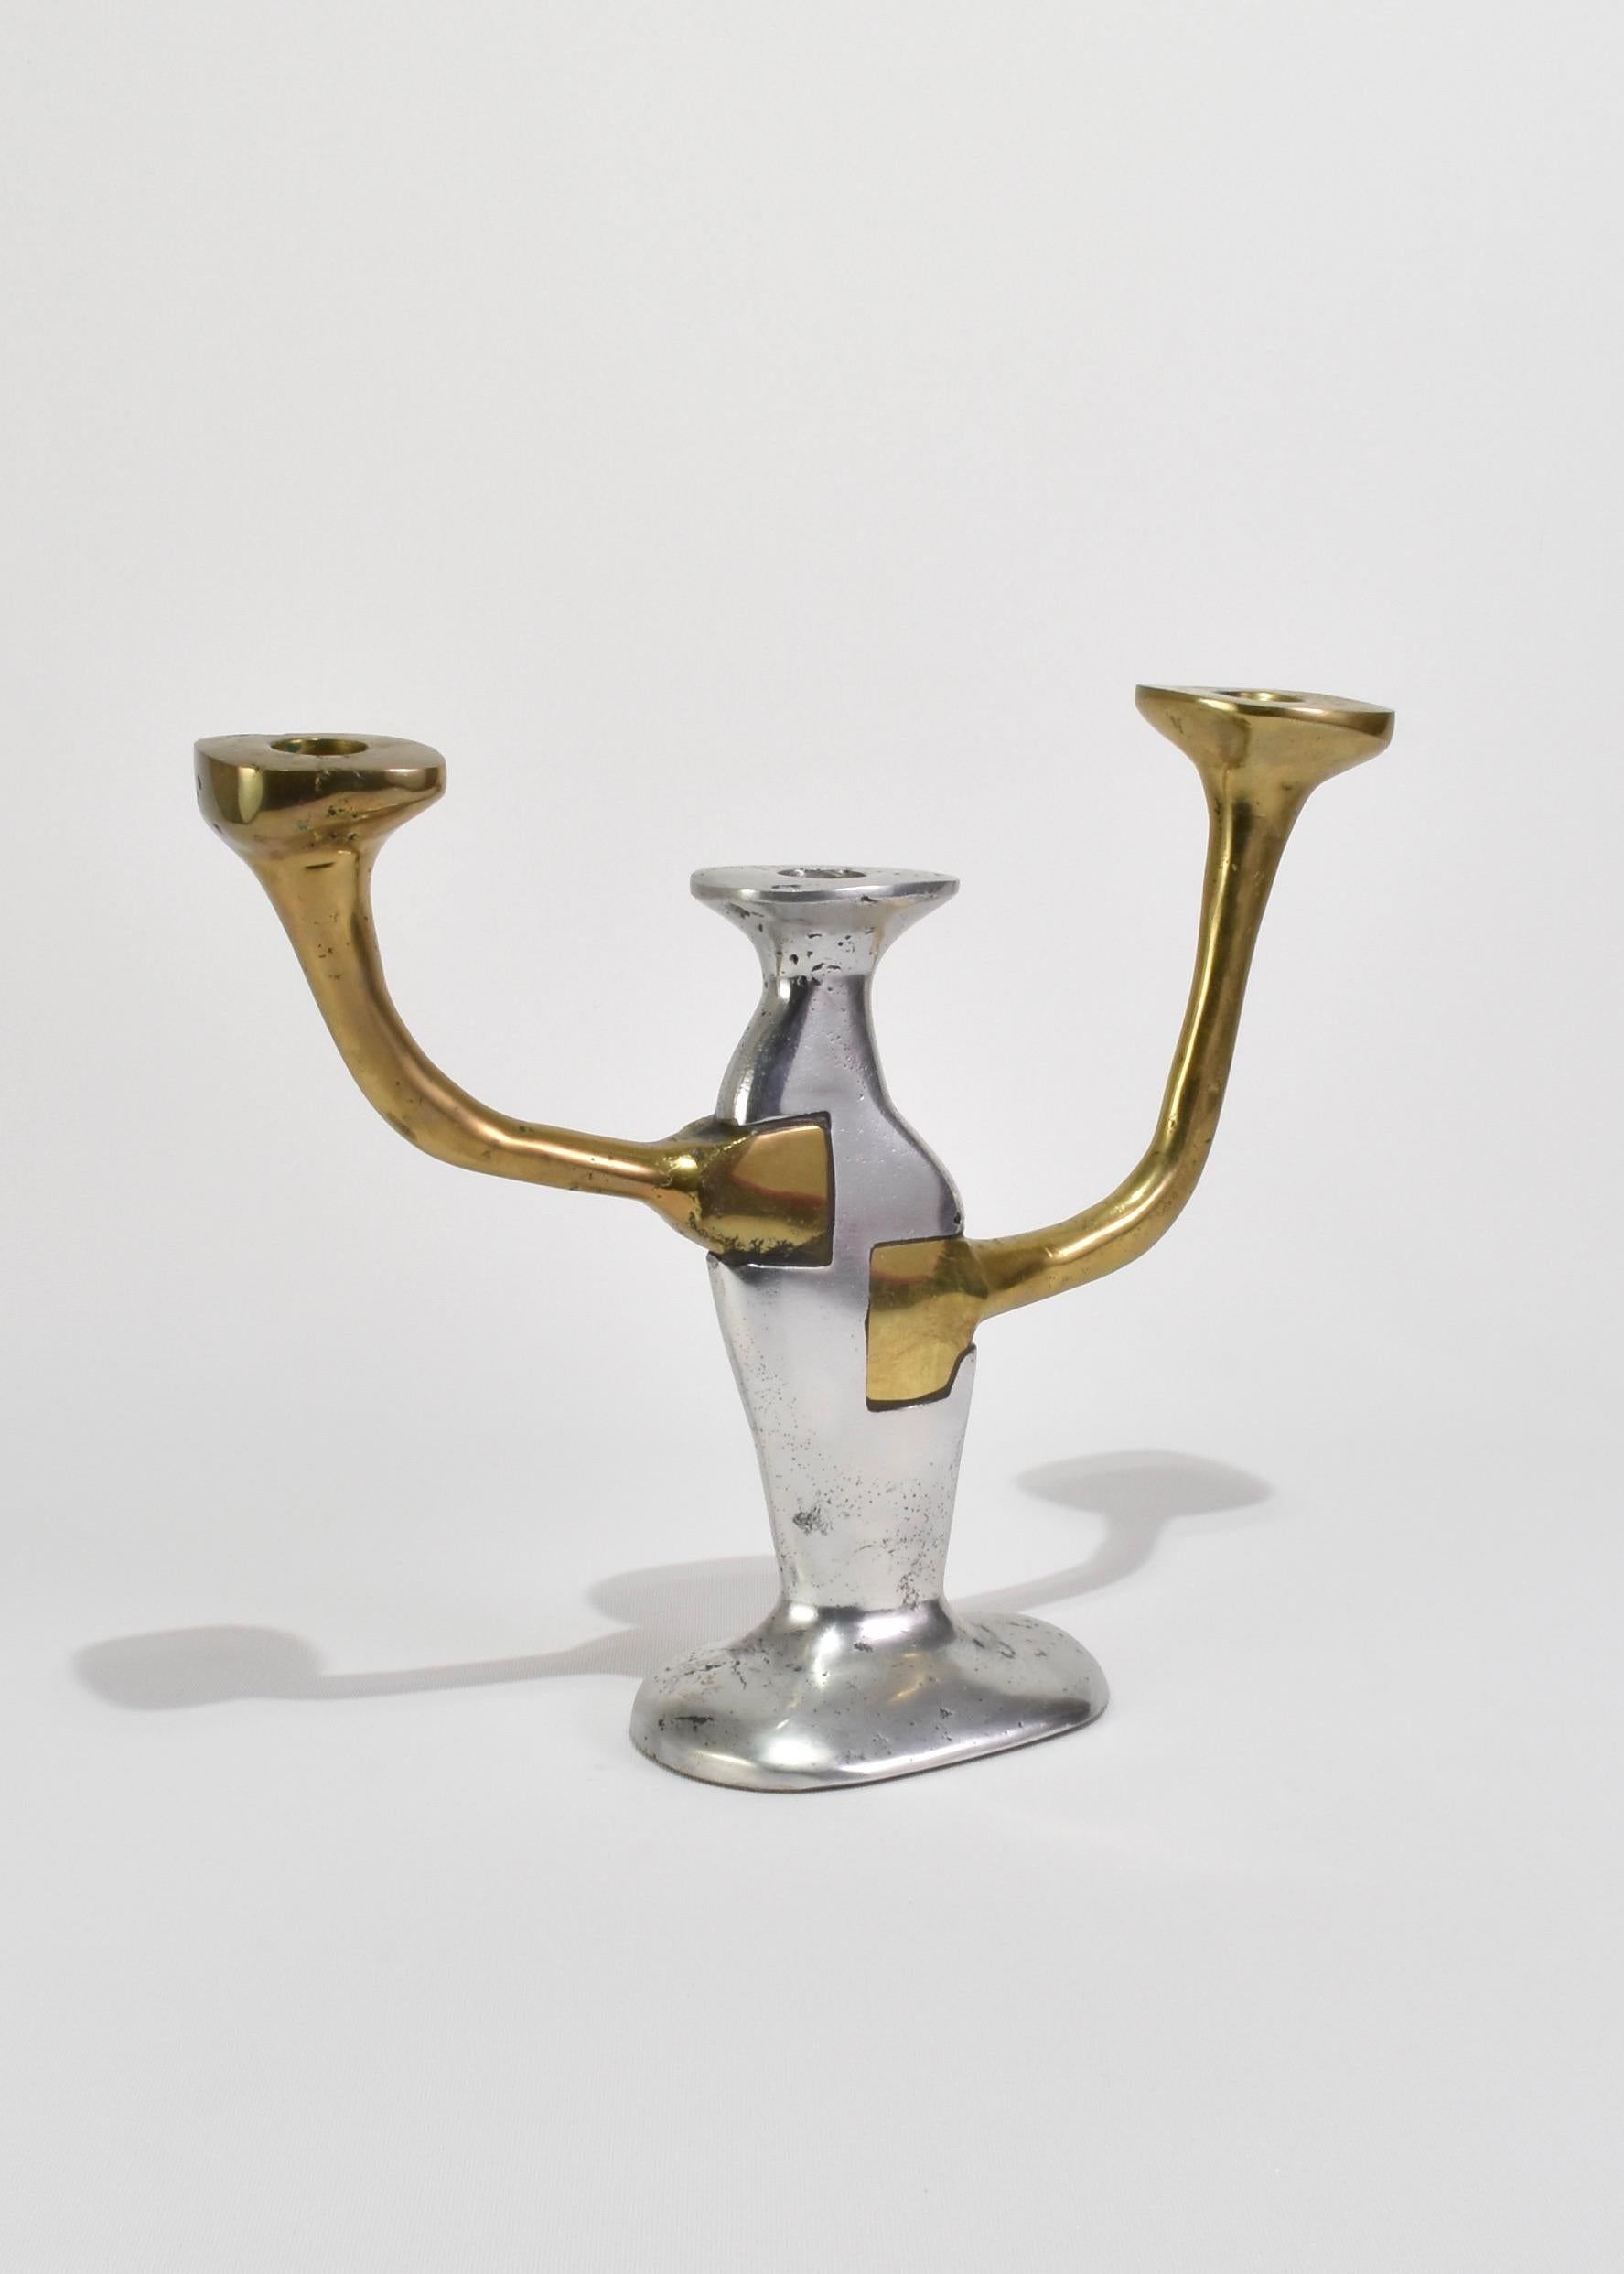 Heavy vintage brutalist candelabra in contrasting aluminum and brass, attributed to David Marshall. Not signed. Ca. 1970s.